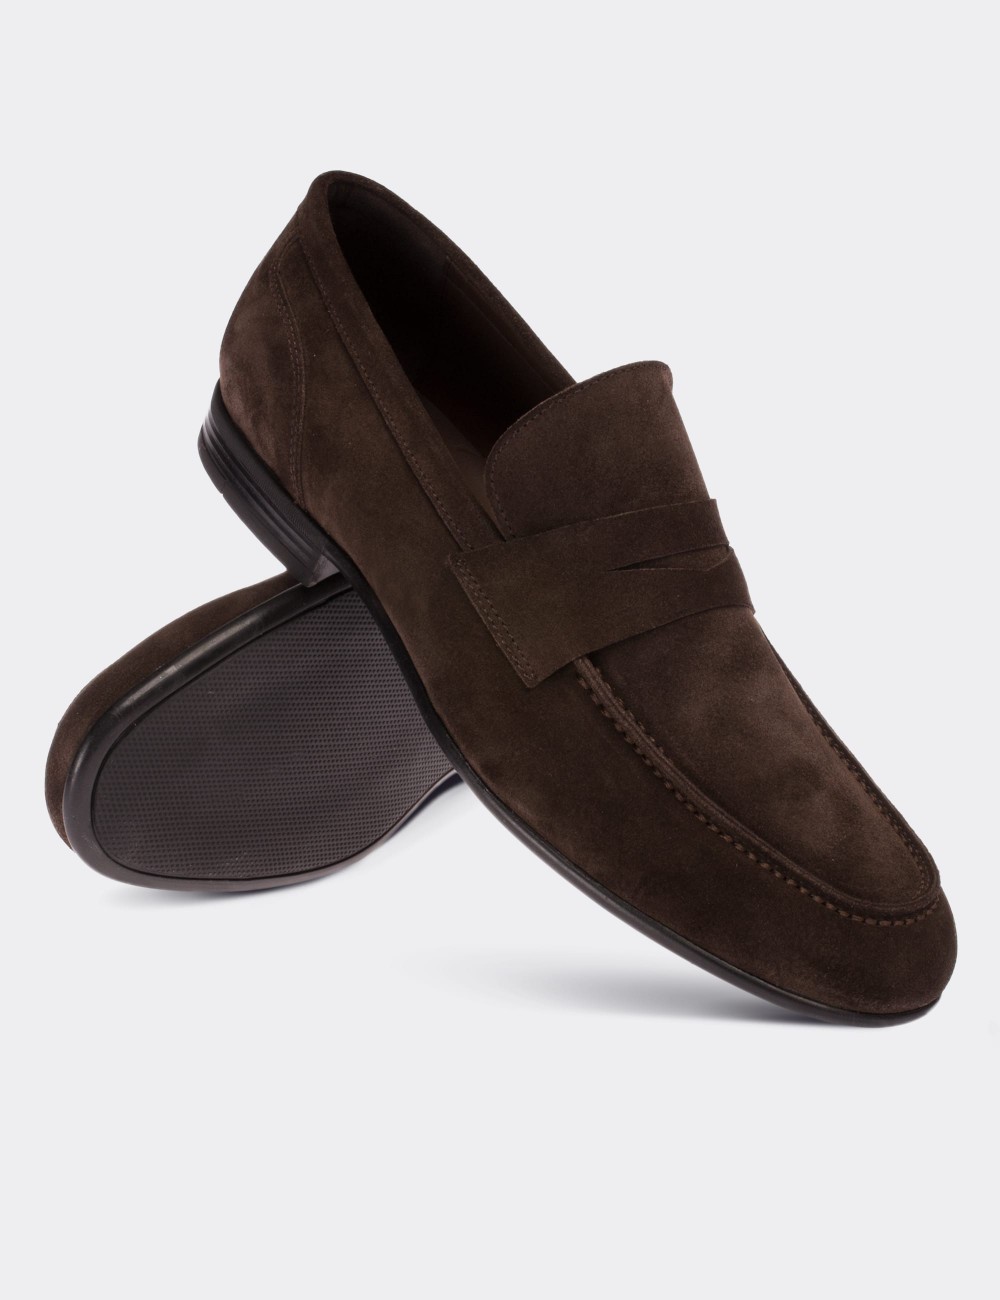 Brown Suede Leather Loafers Shoes - 01714MKHVC01